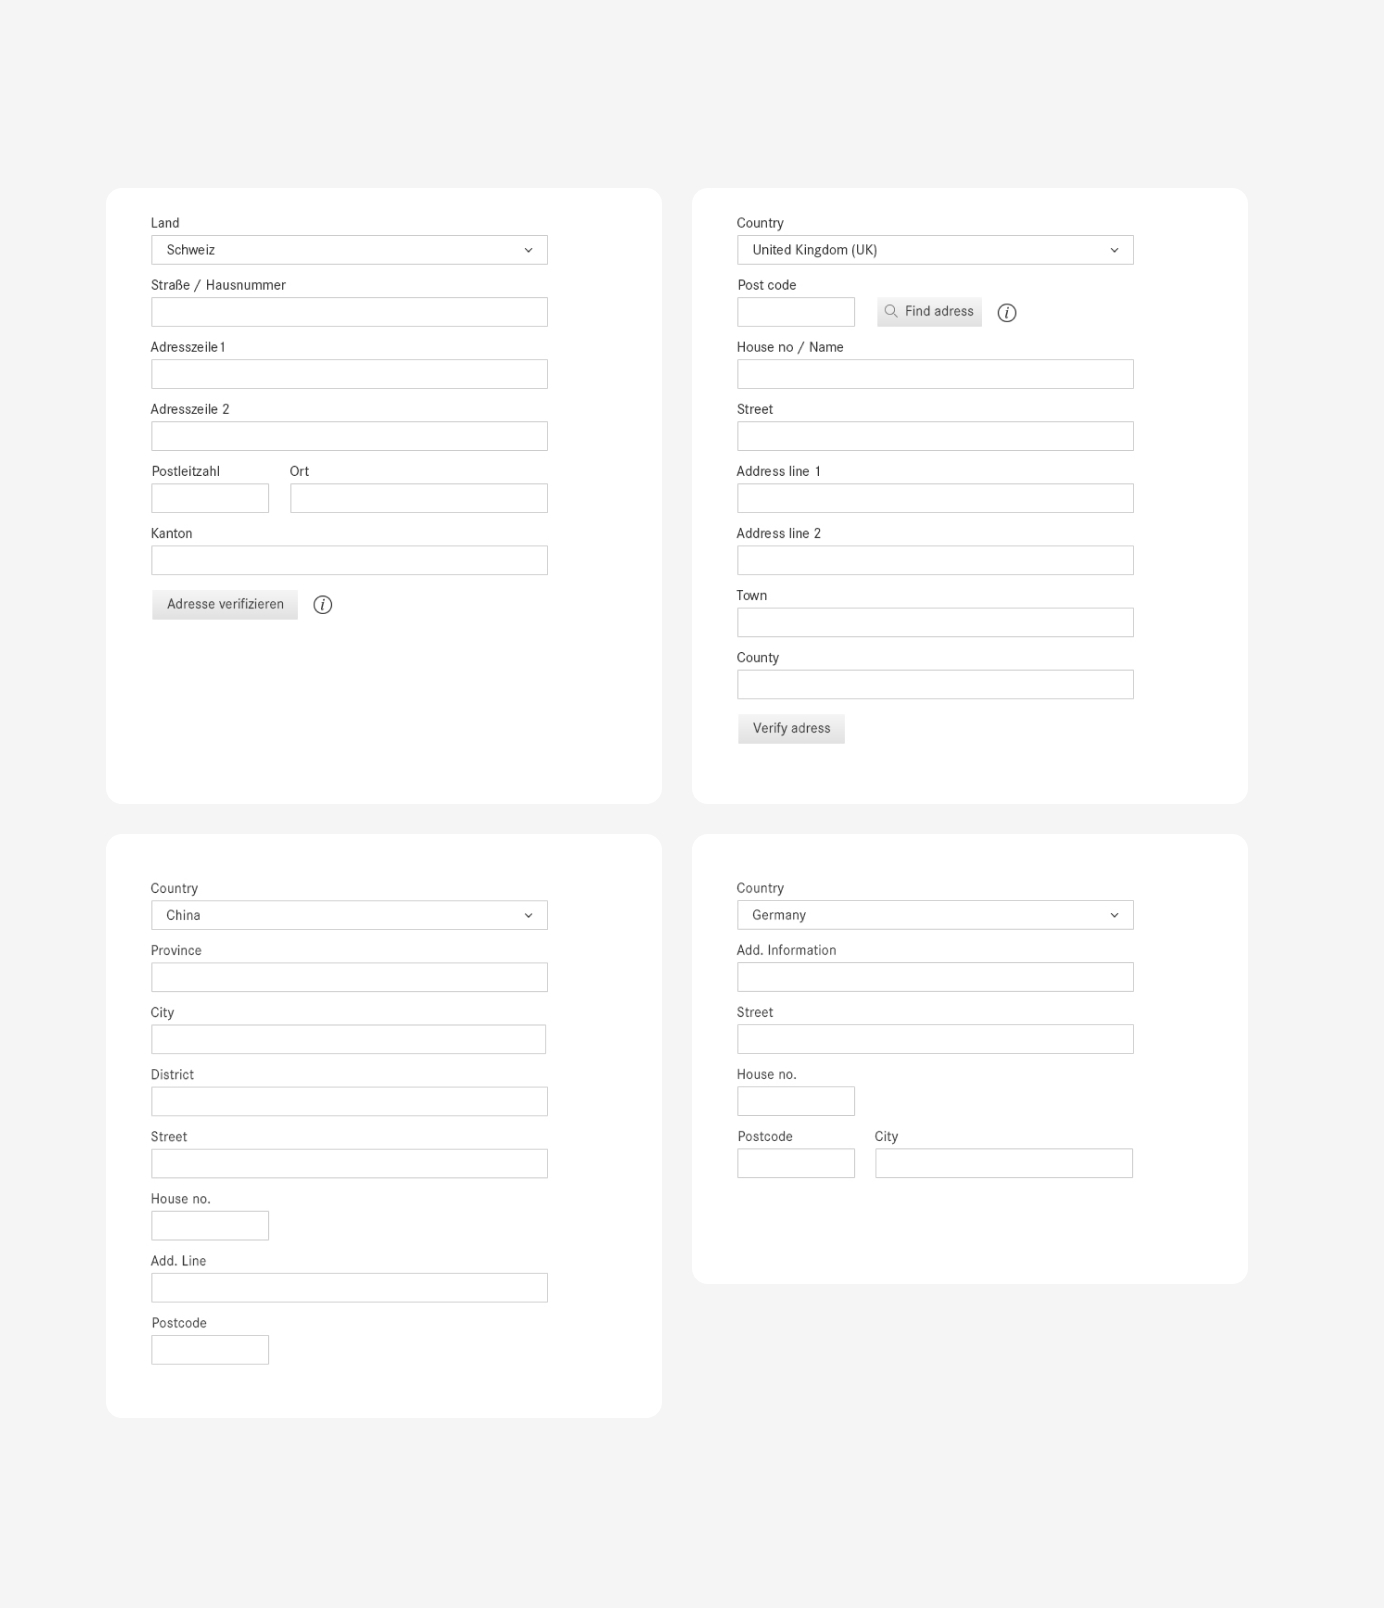 Mercedes-Benz contact form countries ux